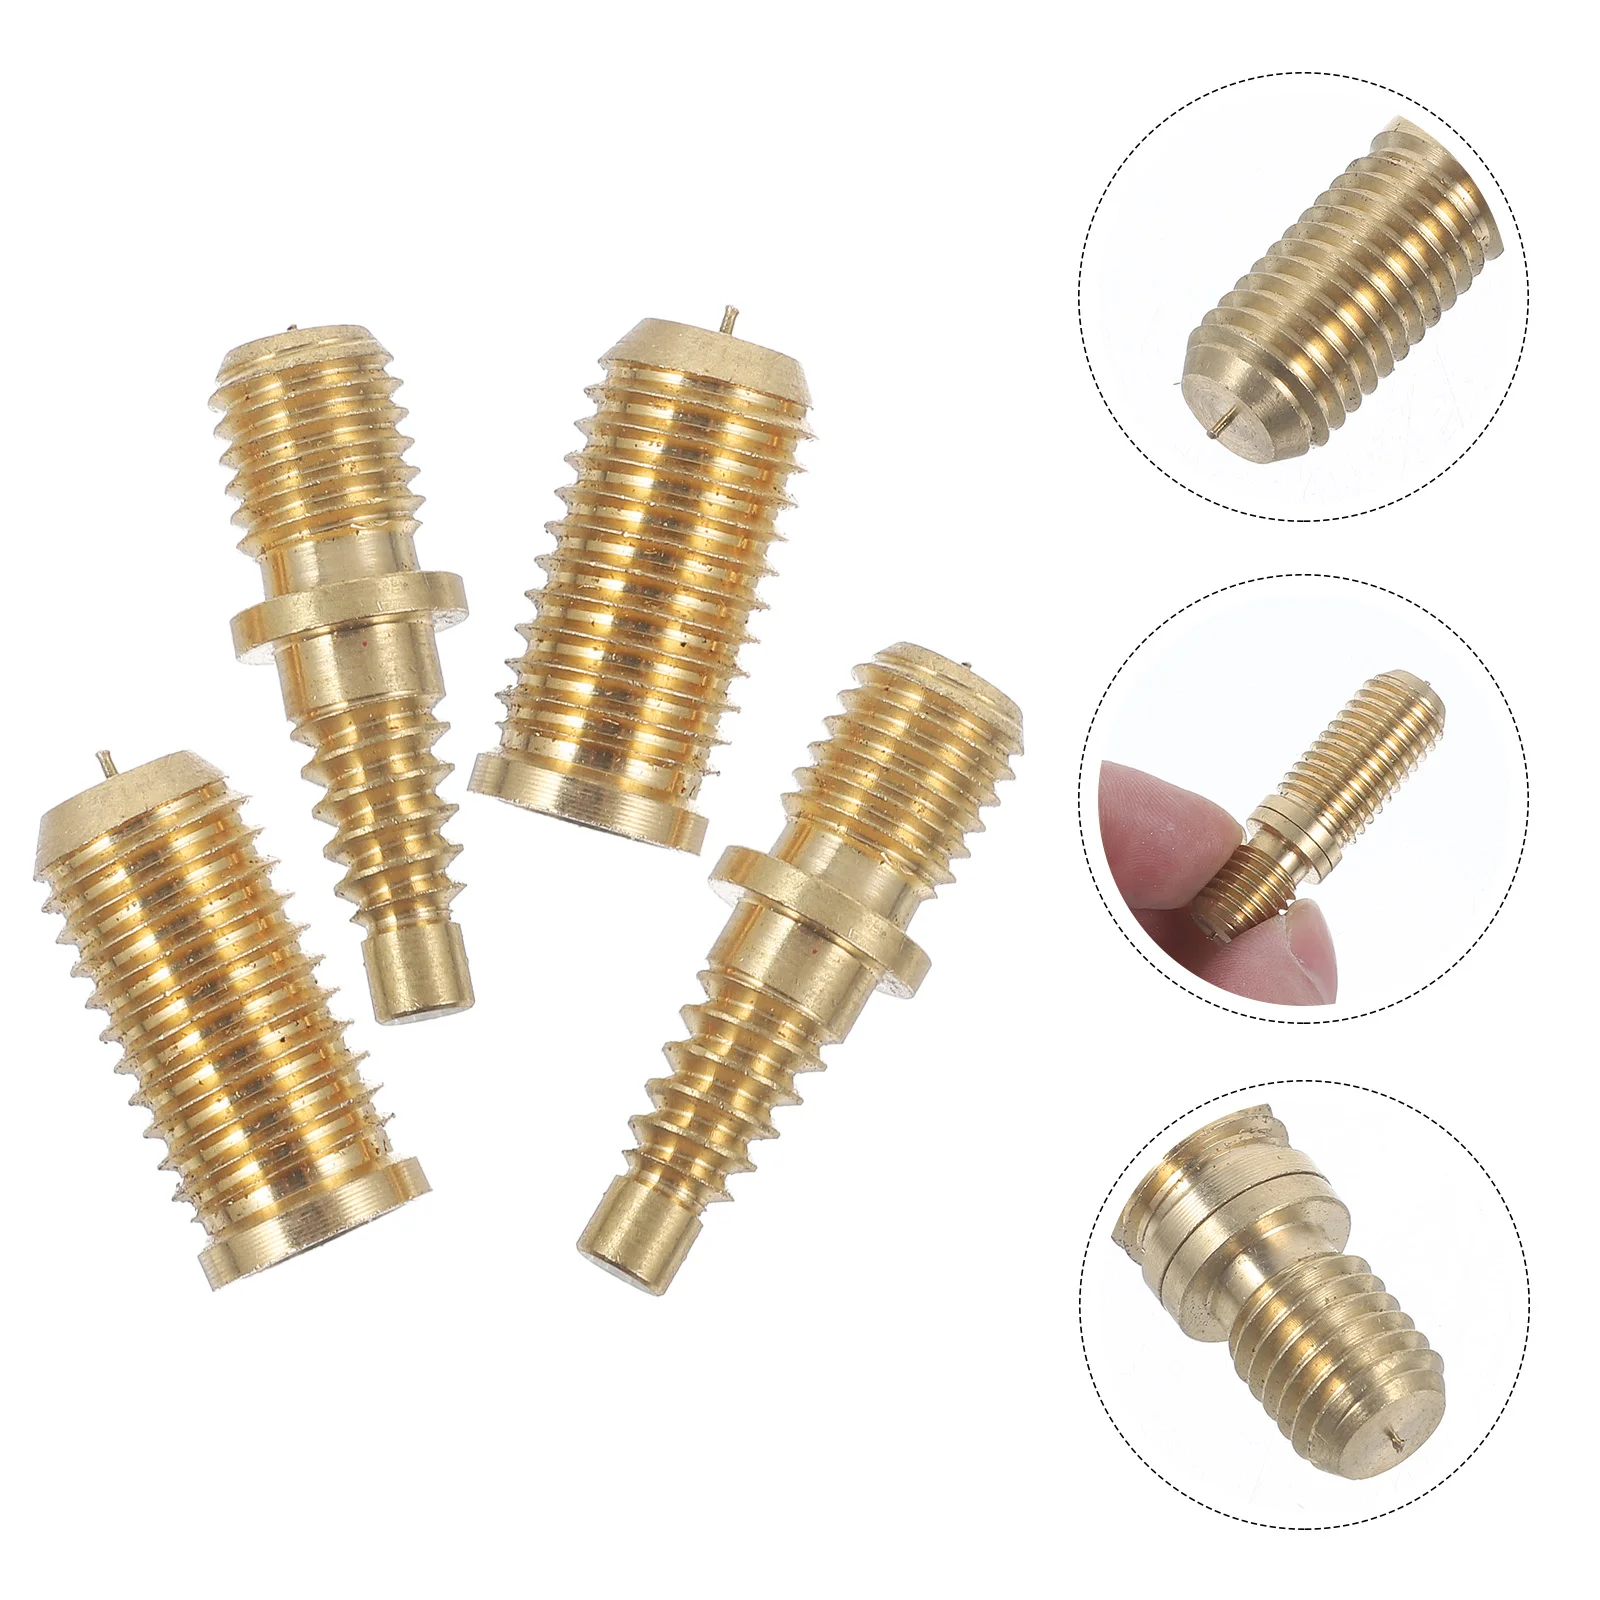 

2 Sets Billiard Cue Screws Extension Pool Heavy Duty Copper Joint Combination Connecting